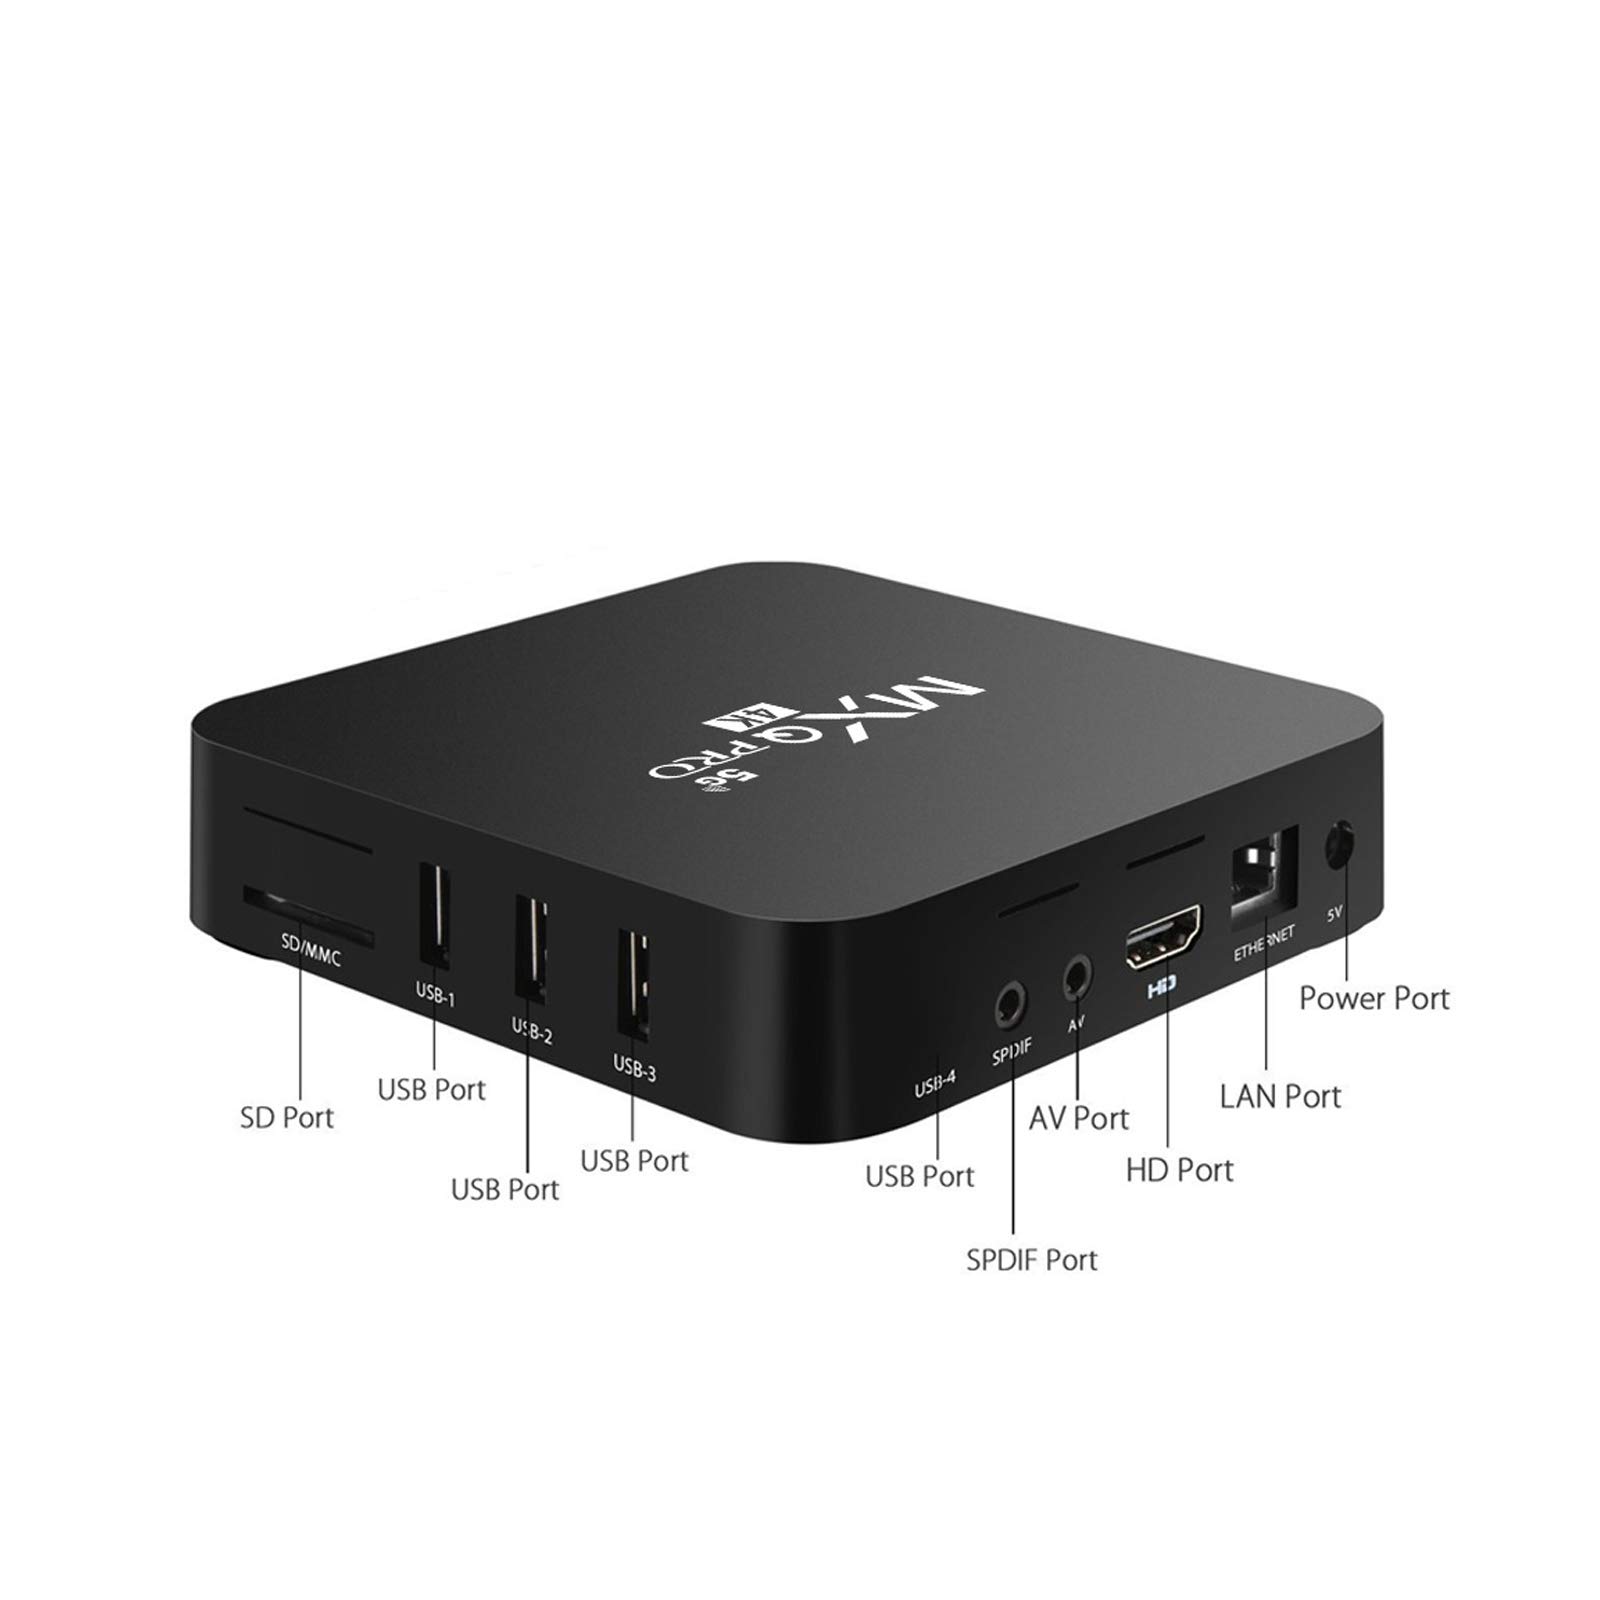 MXQ Pro 5G Android 12.1 TV Box 2023 Upgraded Ram 2GB ROM 16GB Android Smart Box H.265 HD 3D Dual Band 2.4G/5.8G WiFi Quad Core Smart Home Media Player